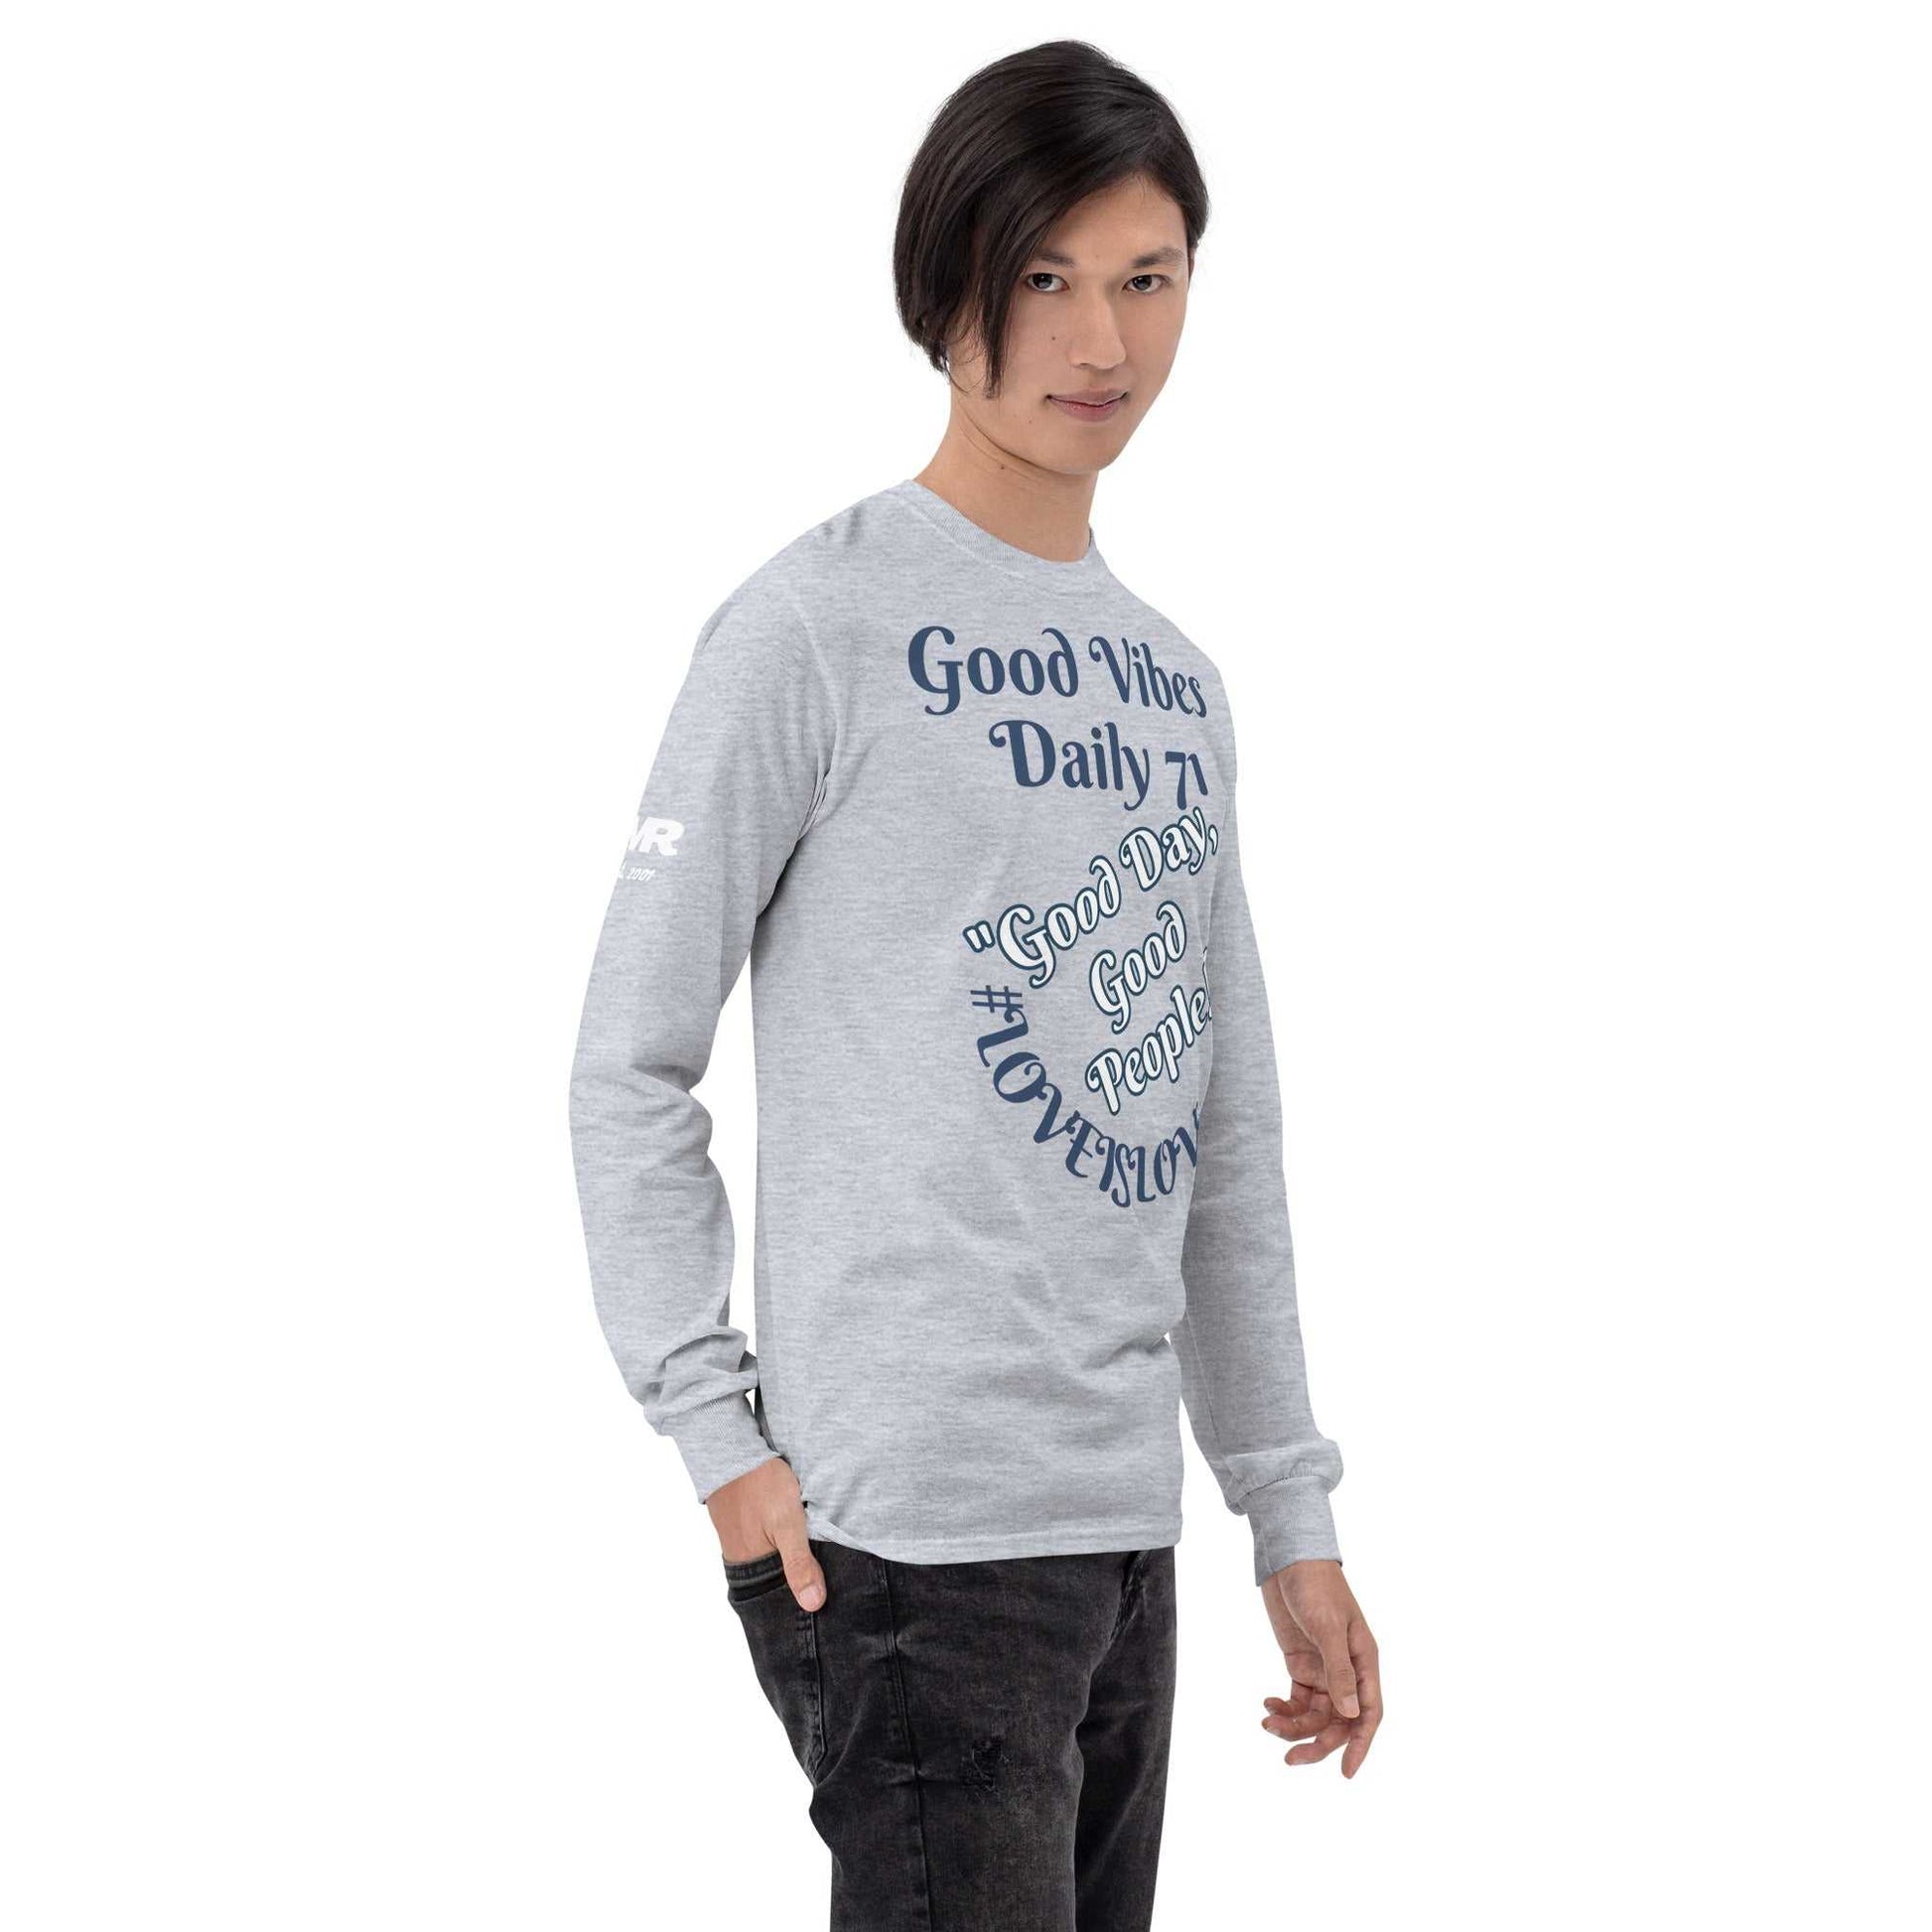 JMR Good Day Special Edition Grey/Navy Long Sleeve Shirt The JMR Collection T-shirt Good Vibes Daily Lab 46